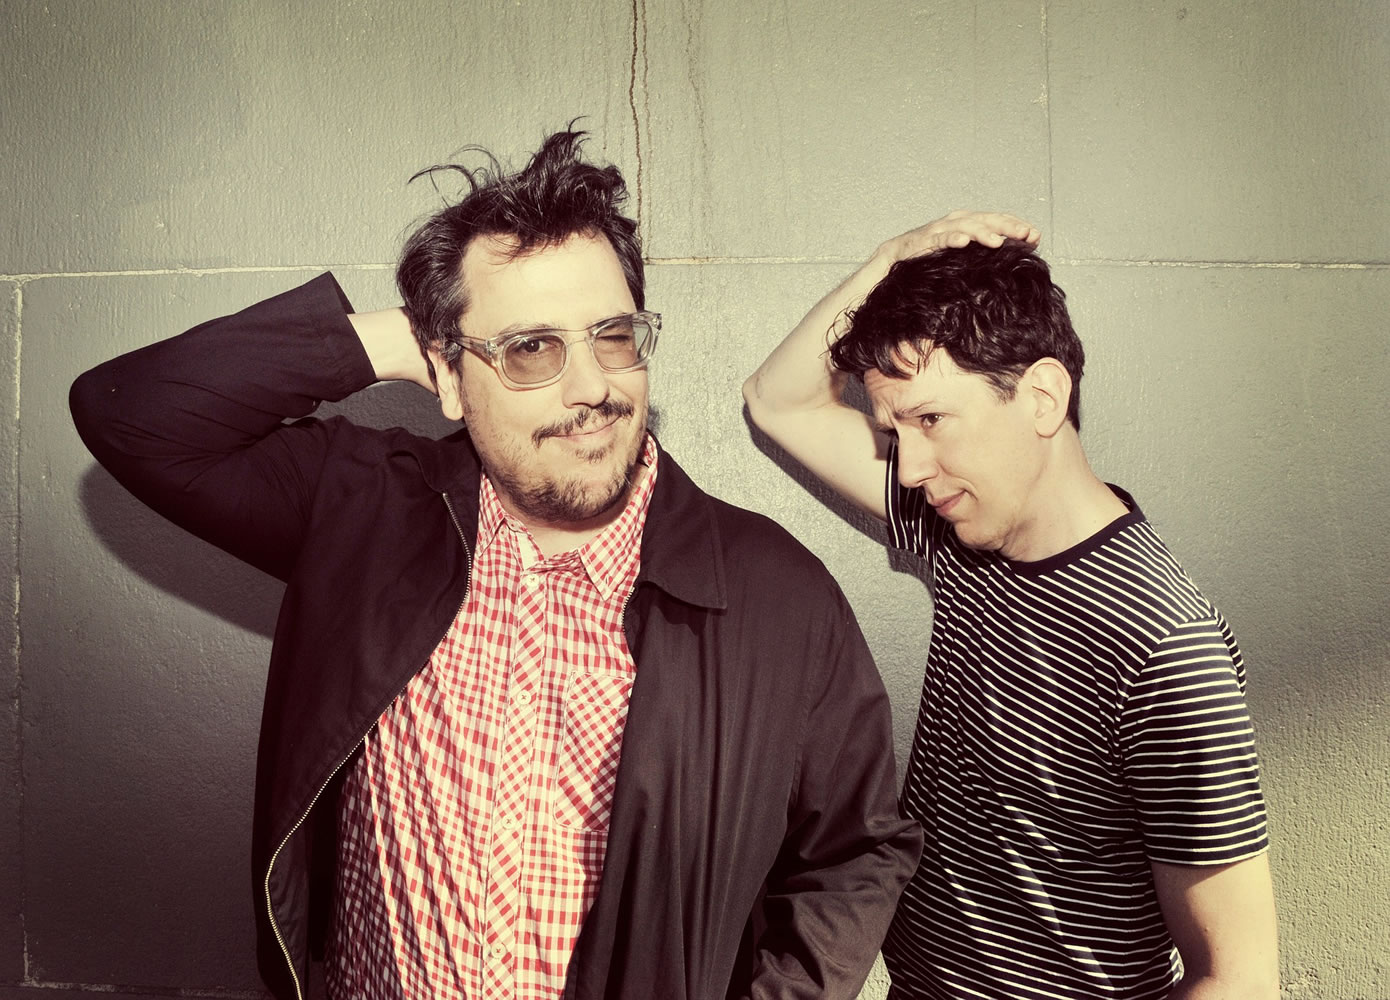 They Might Be Giants will perform May 8, 2015, at the Roseland Theater in Portland.